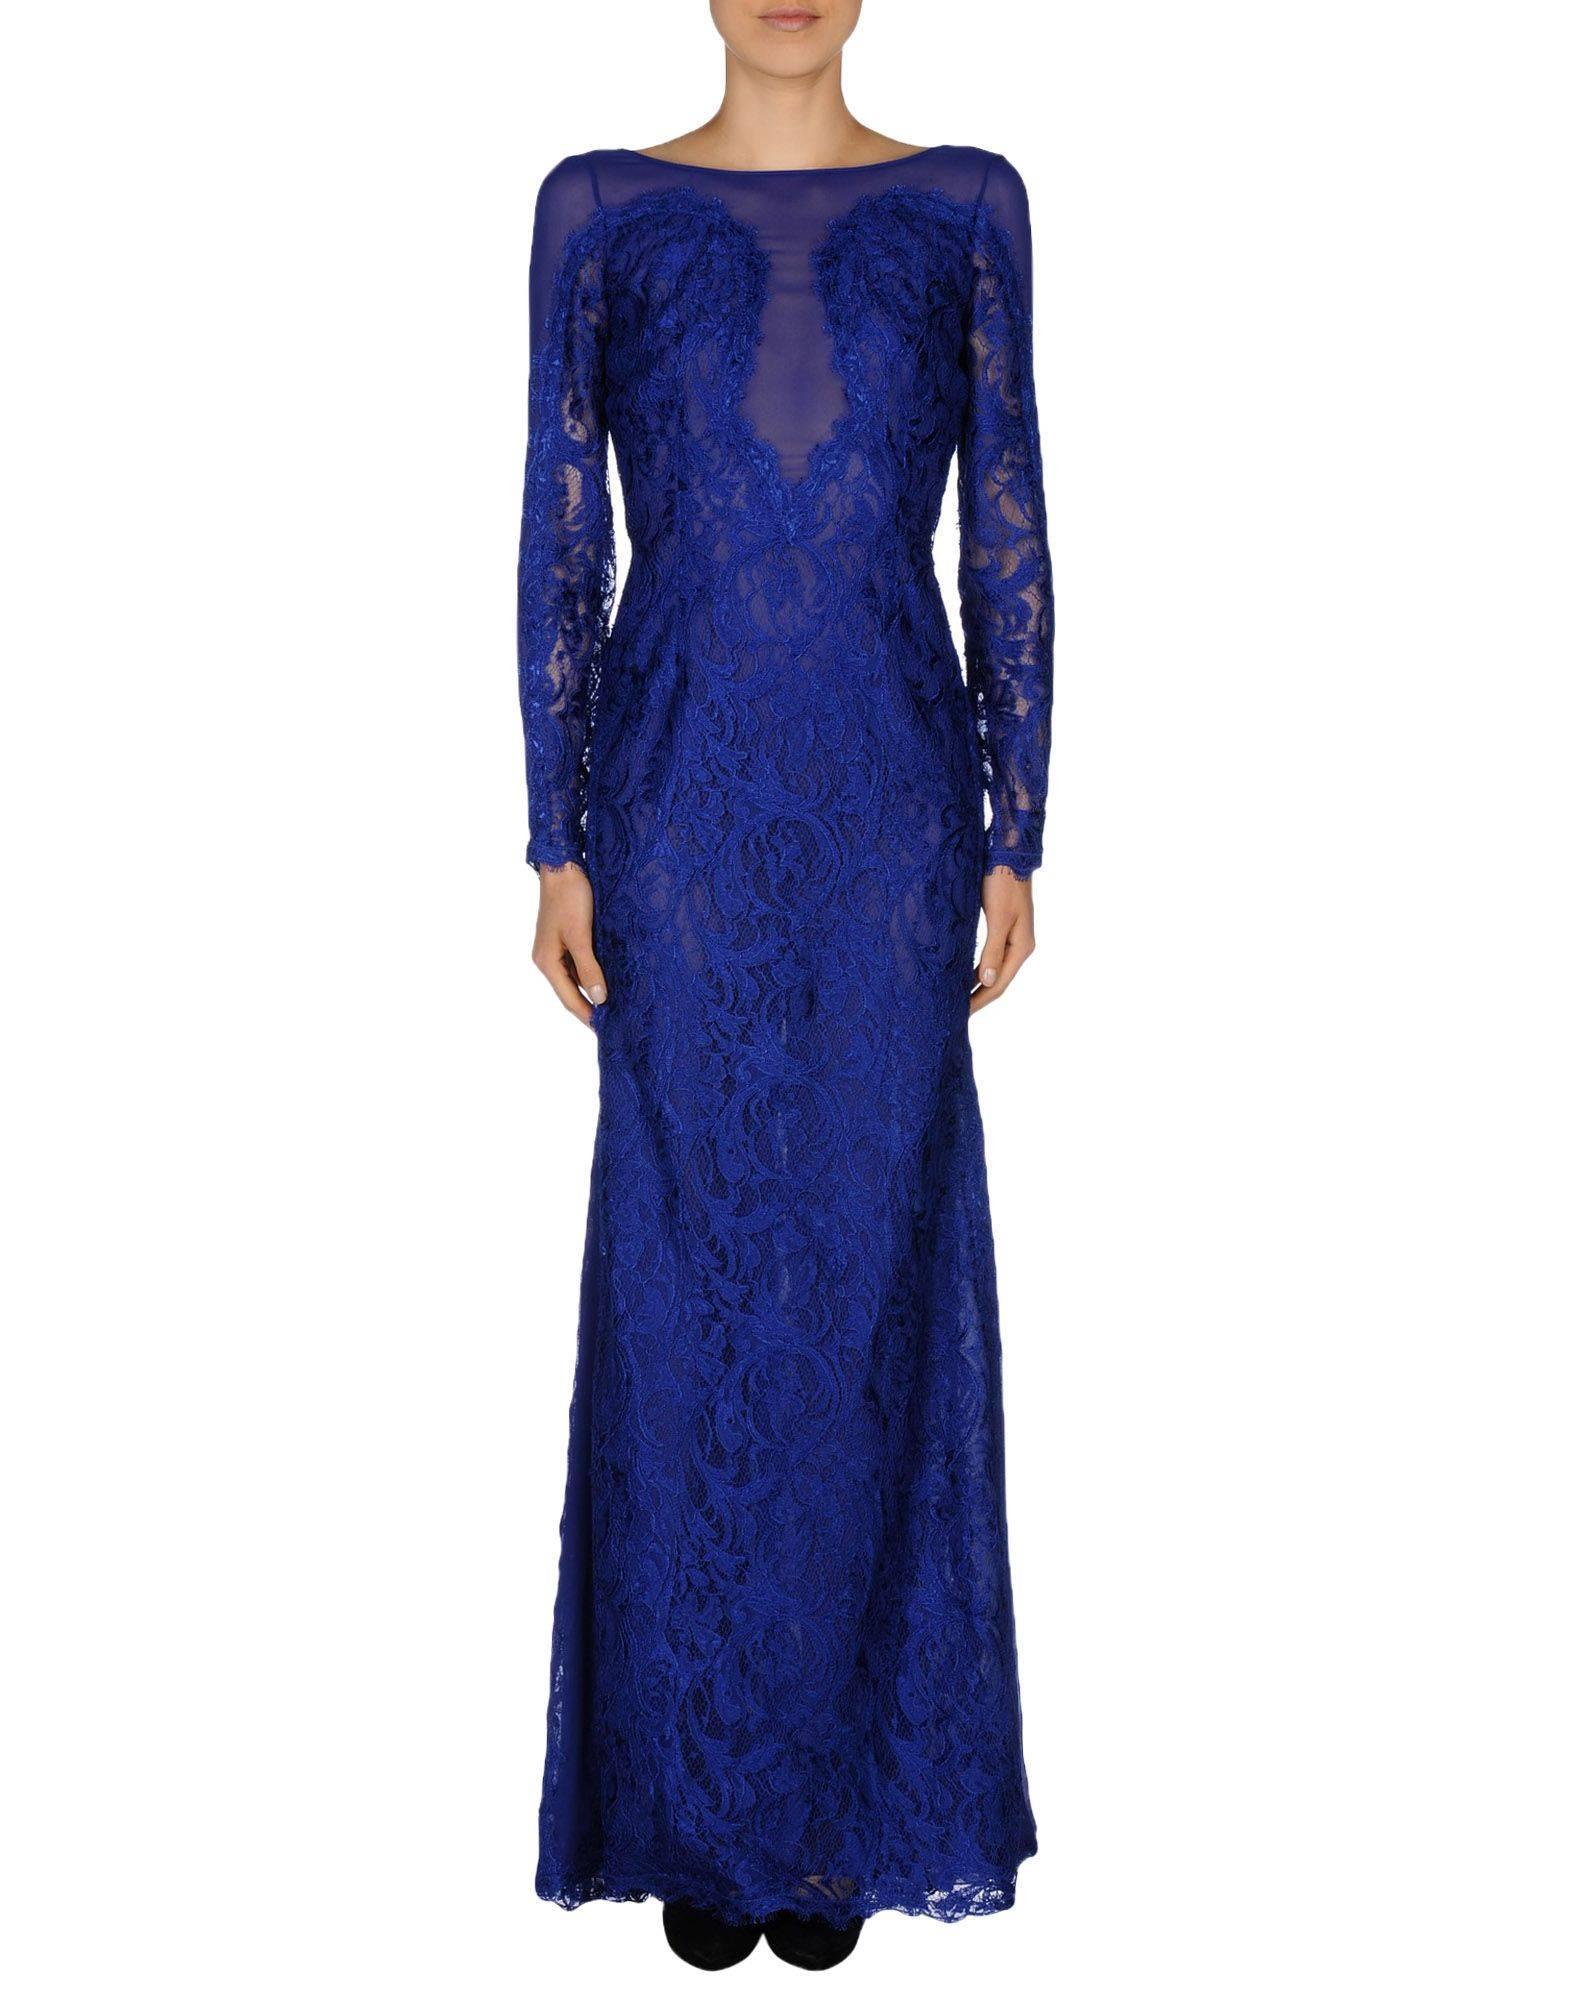 Purple New Emilio Pucci Lace Cheer Blue Dress Gown It.40